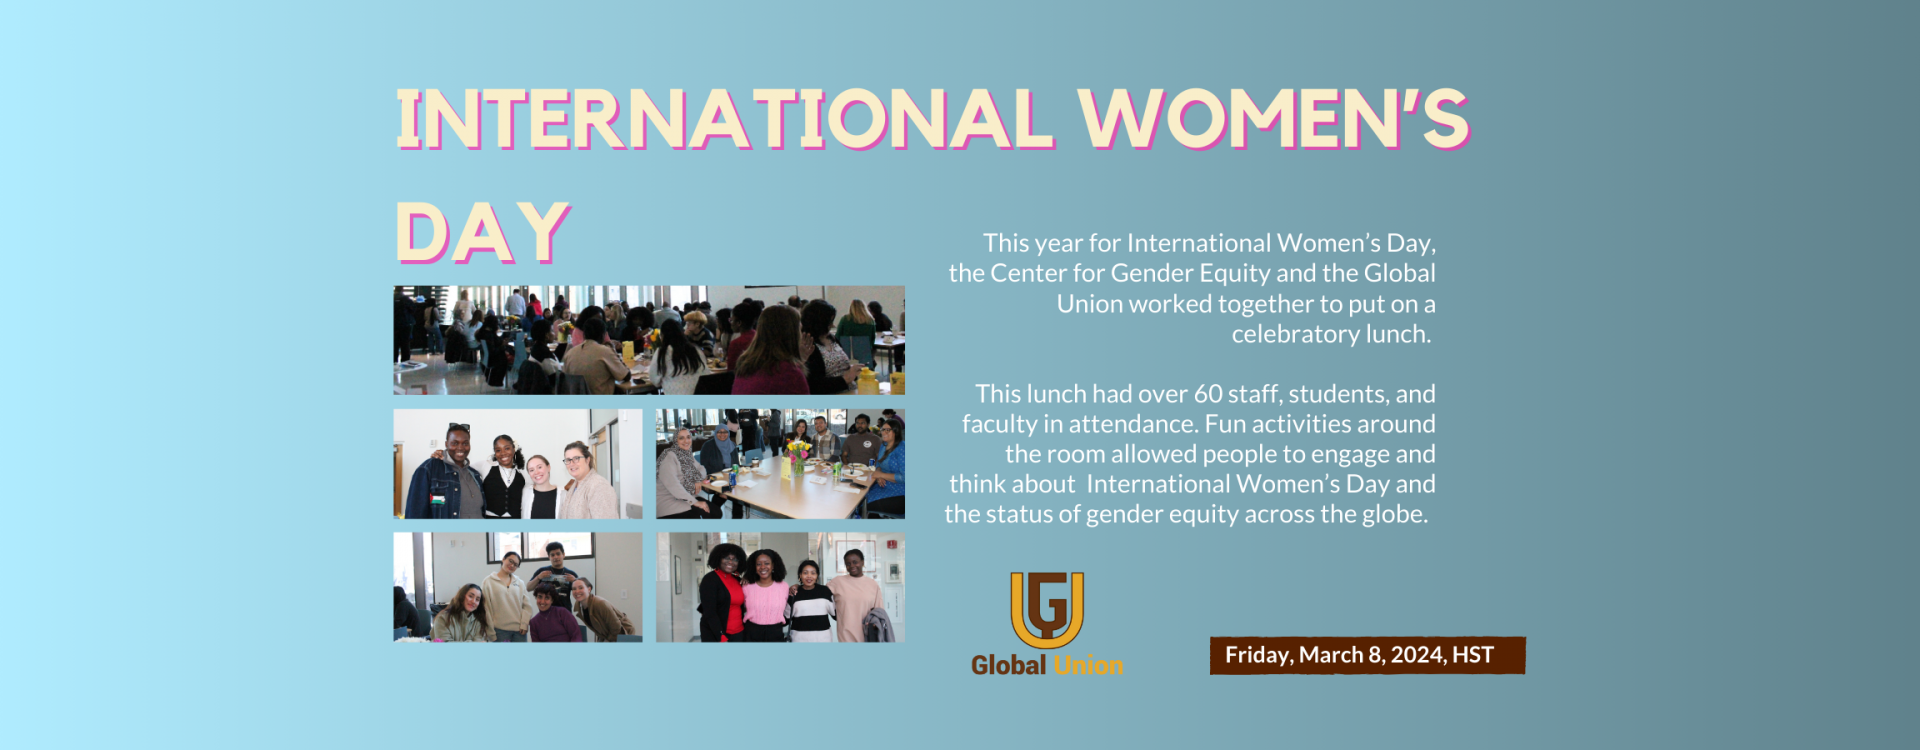 This year for International Women’s Day, the Center for Gender Equity and the Global Union worked together to put on a celebratory lunch.   This lunch had over 60 staff, students, and faculty in attendance. Fun activities around the room allowed people to engage and think about  International Women’s Day and the status of gender equity across the globe.